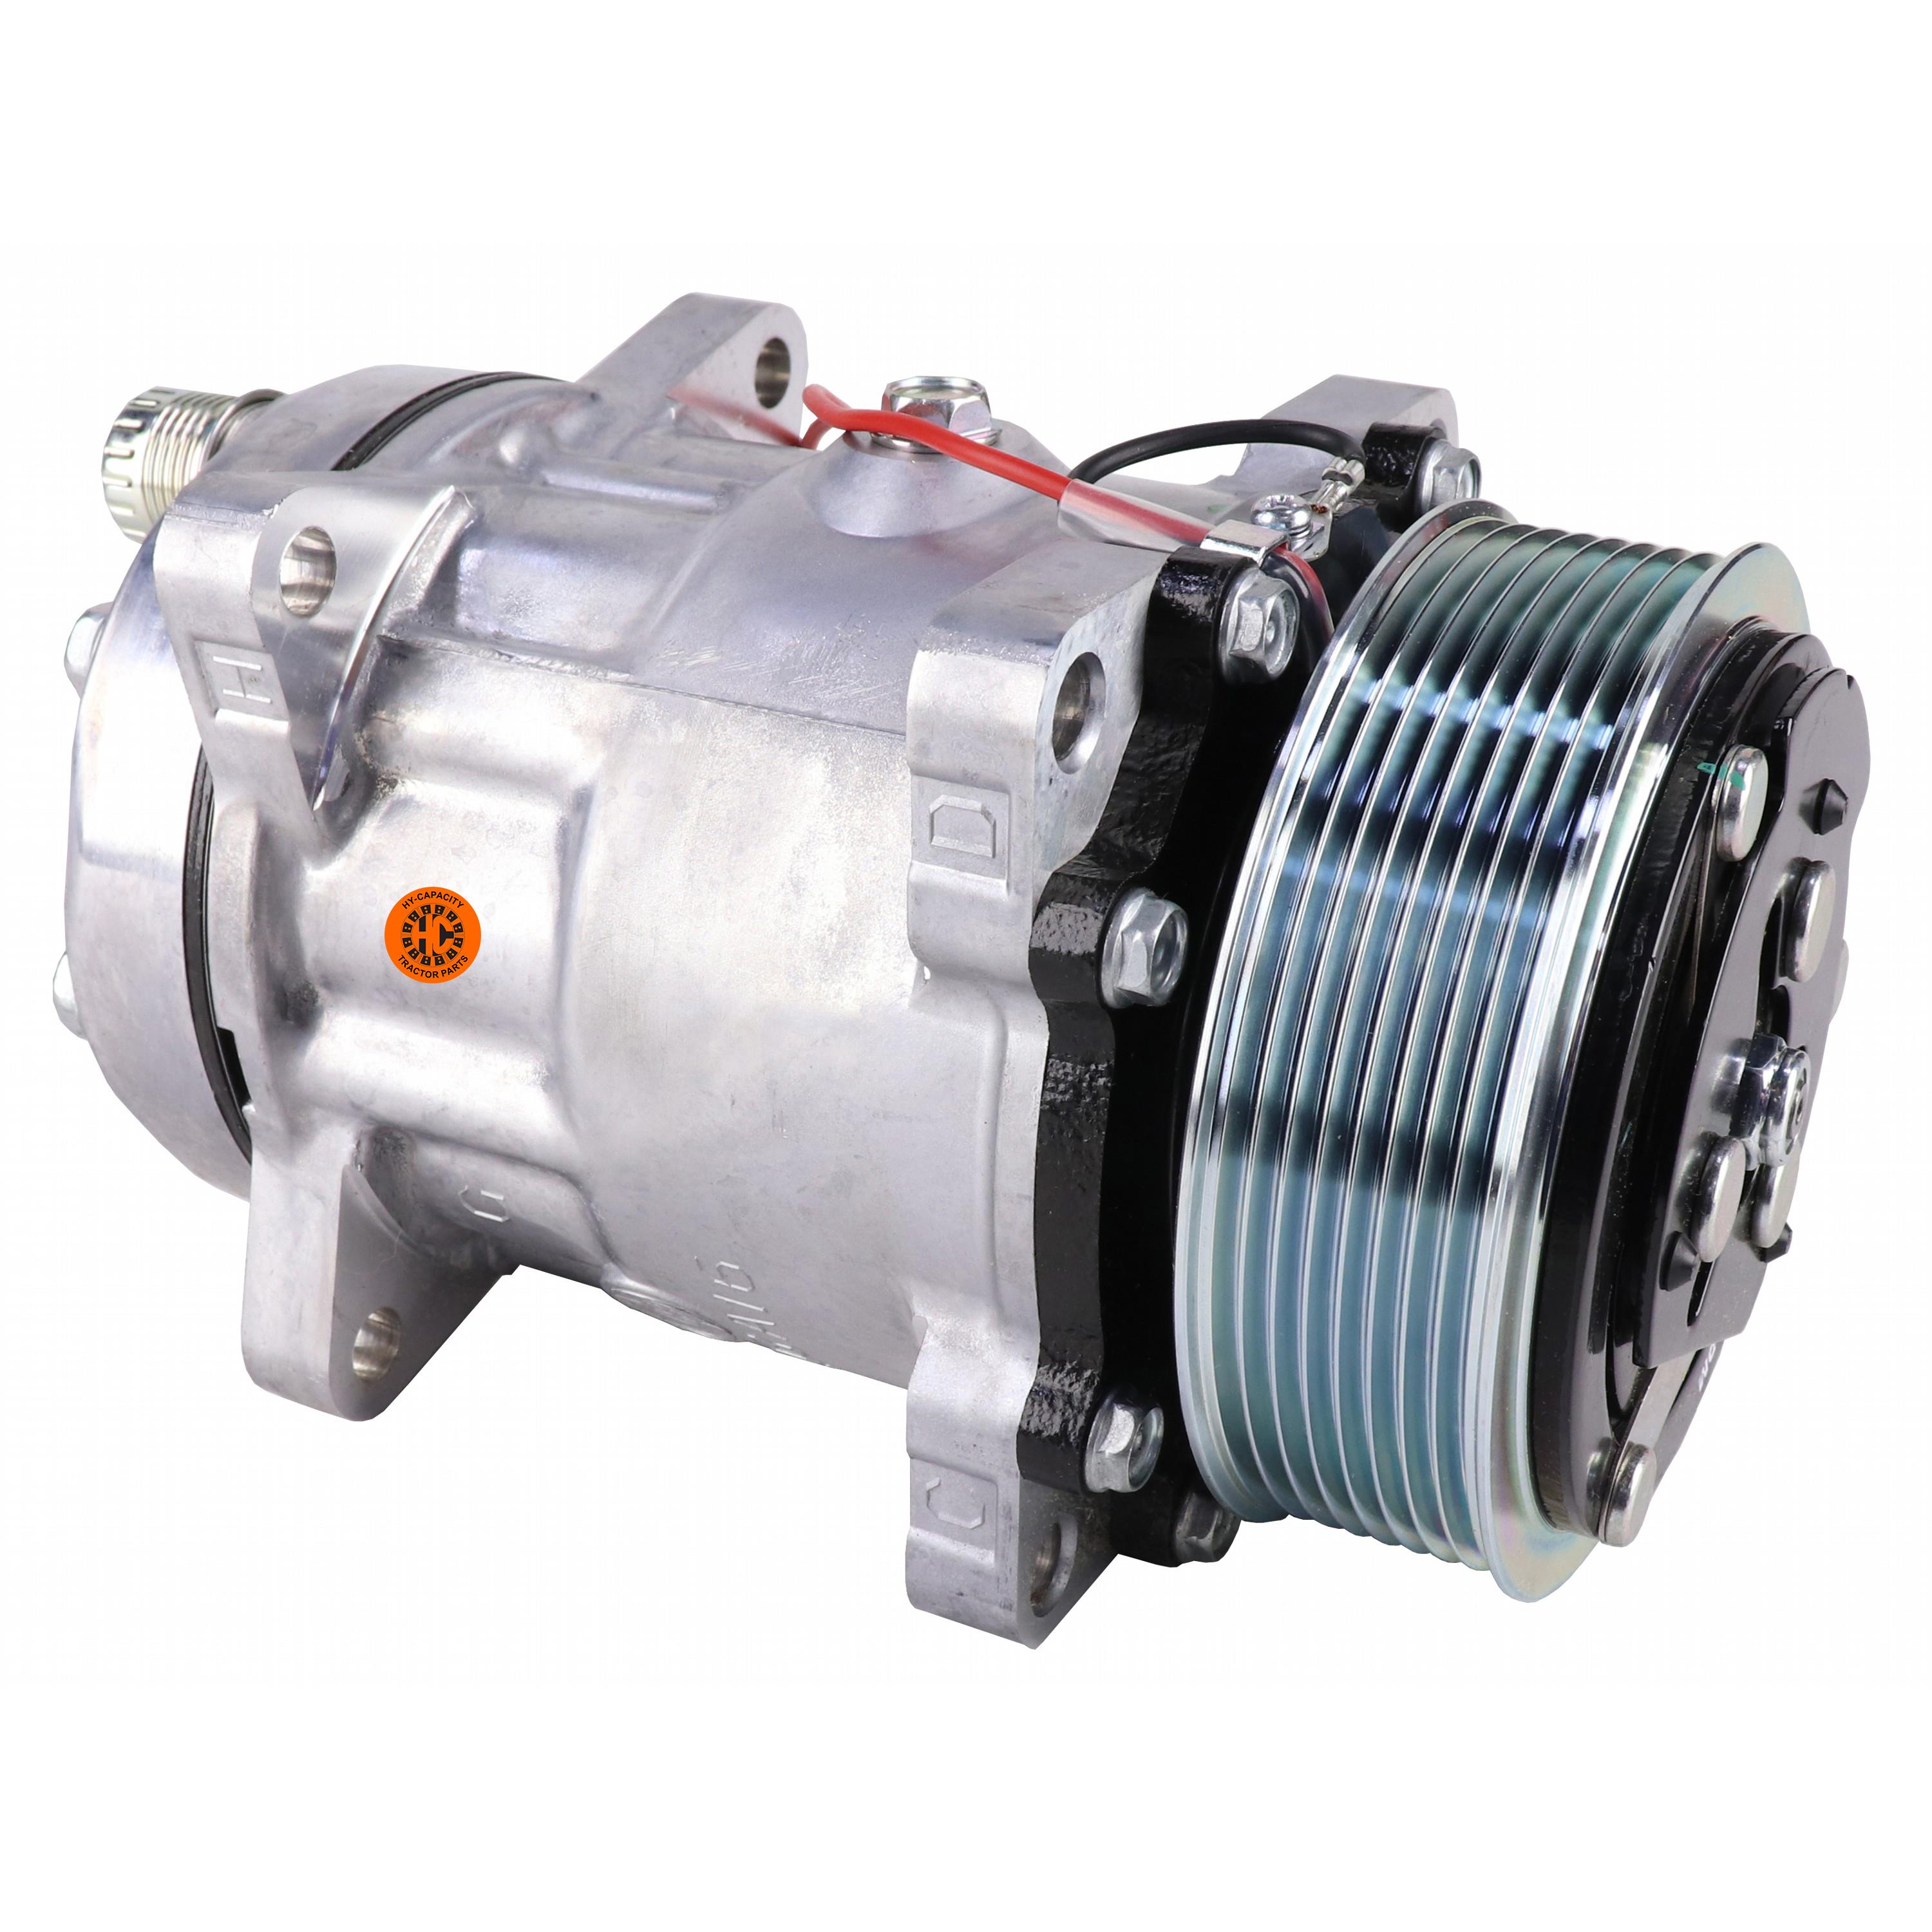 L77.0441 Ford New Holland Air Conditioning Compressor